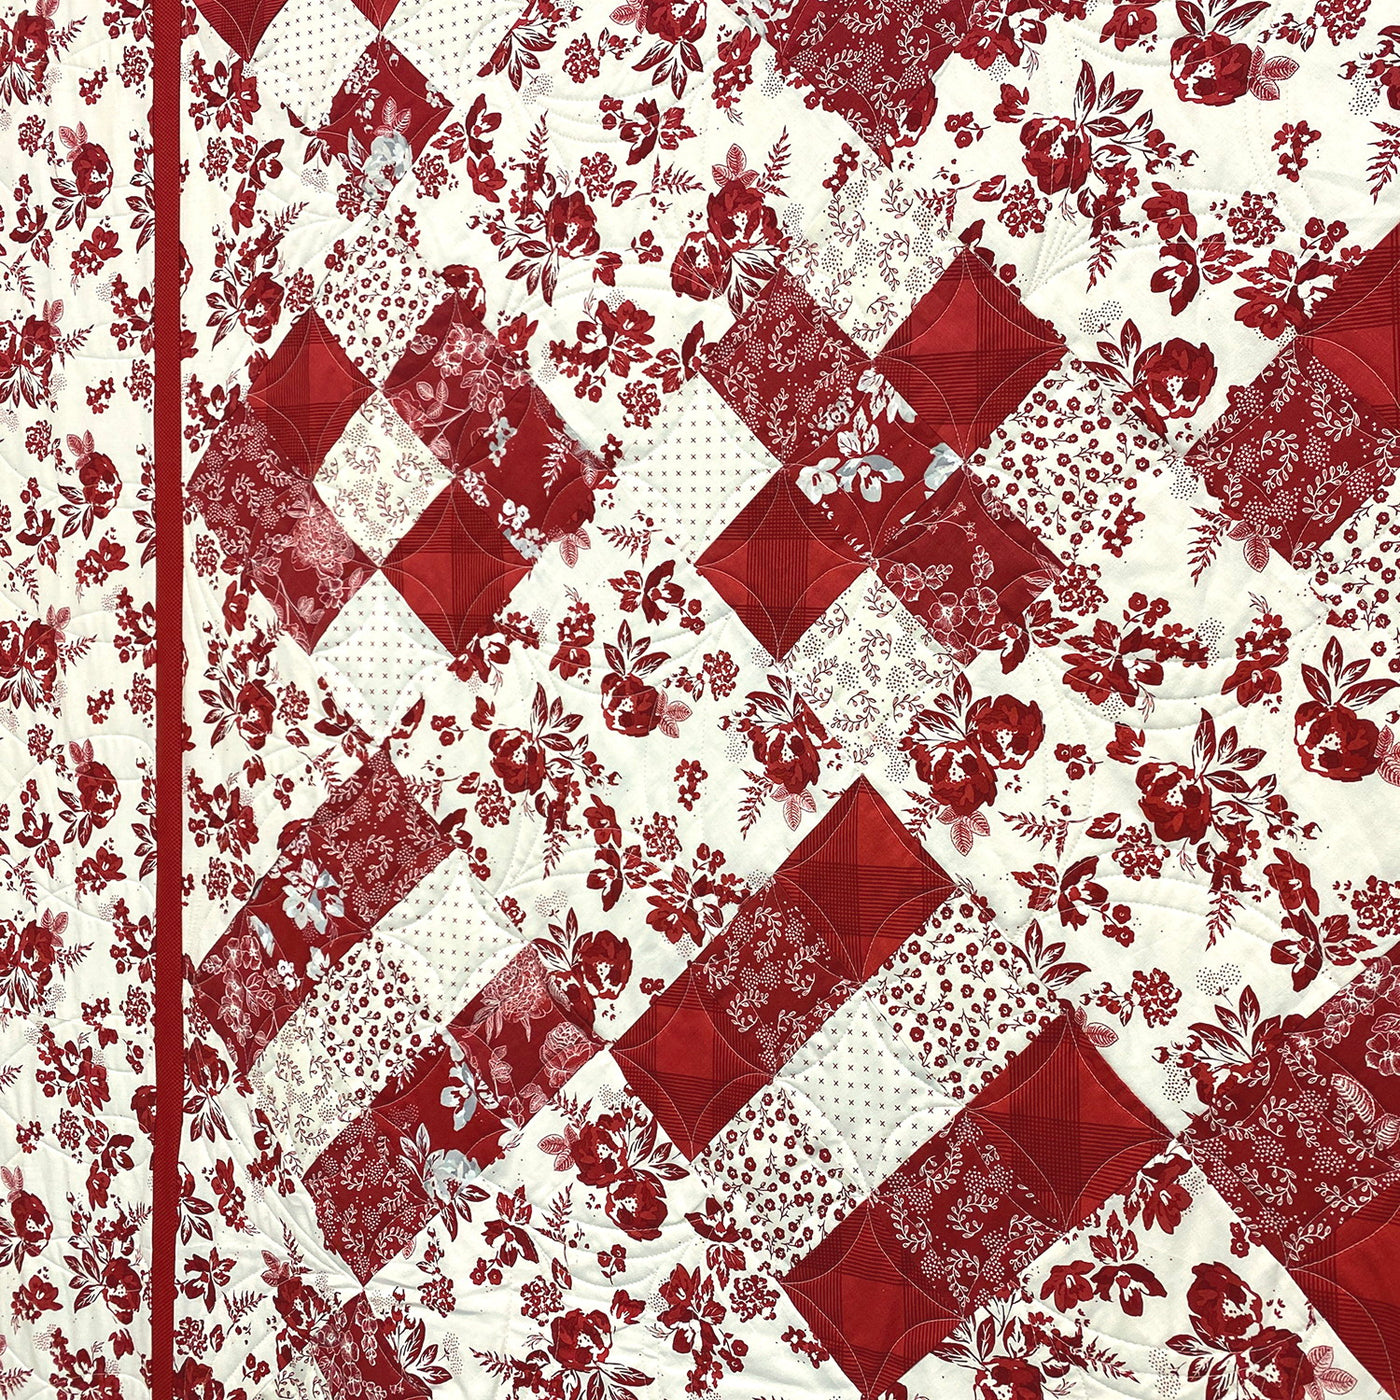 Heirloom Red 9-Patch Quilt Kit